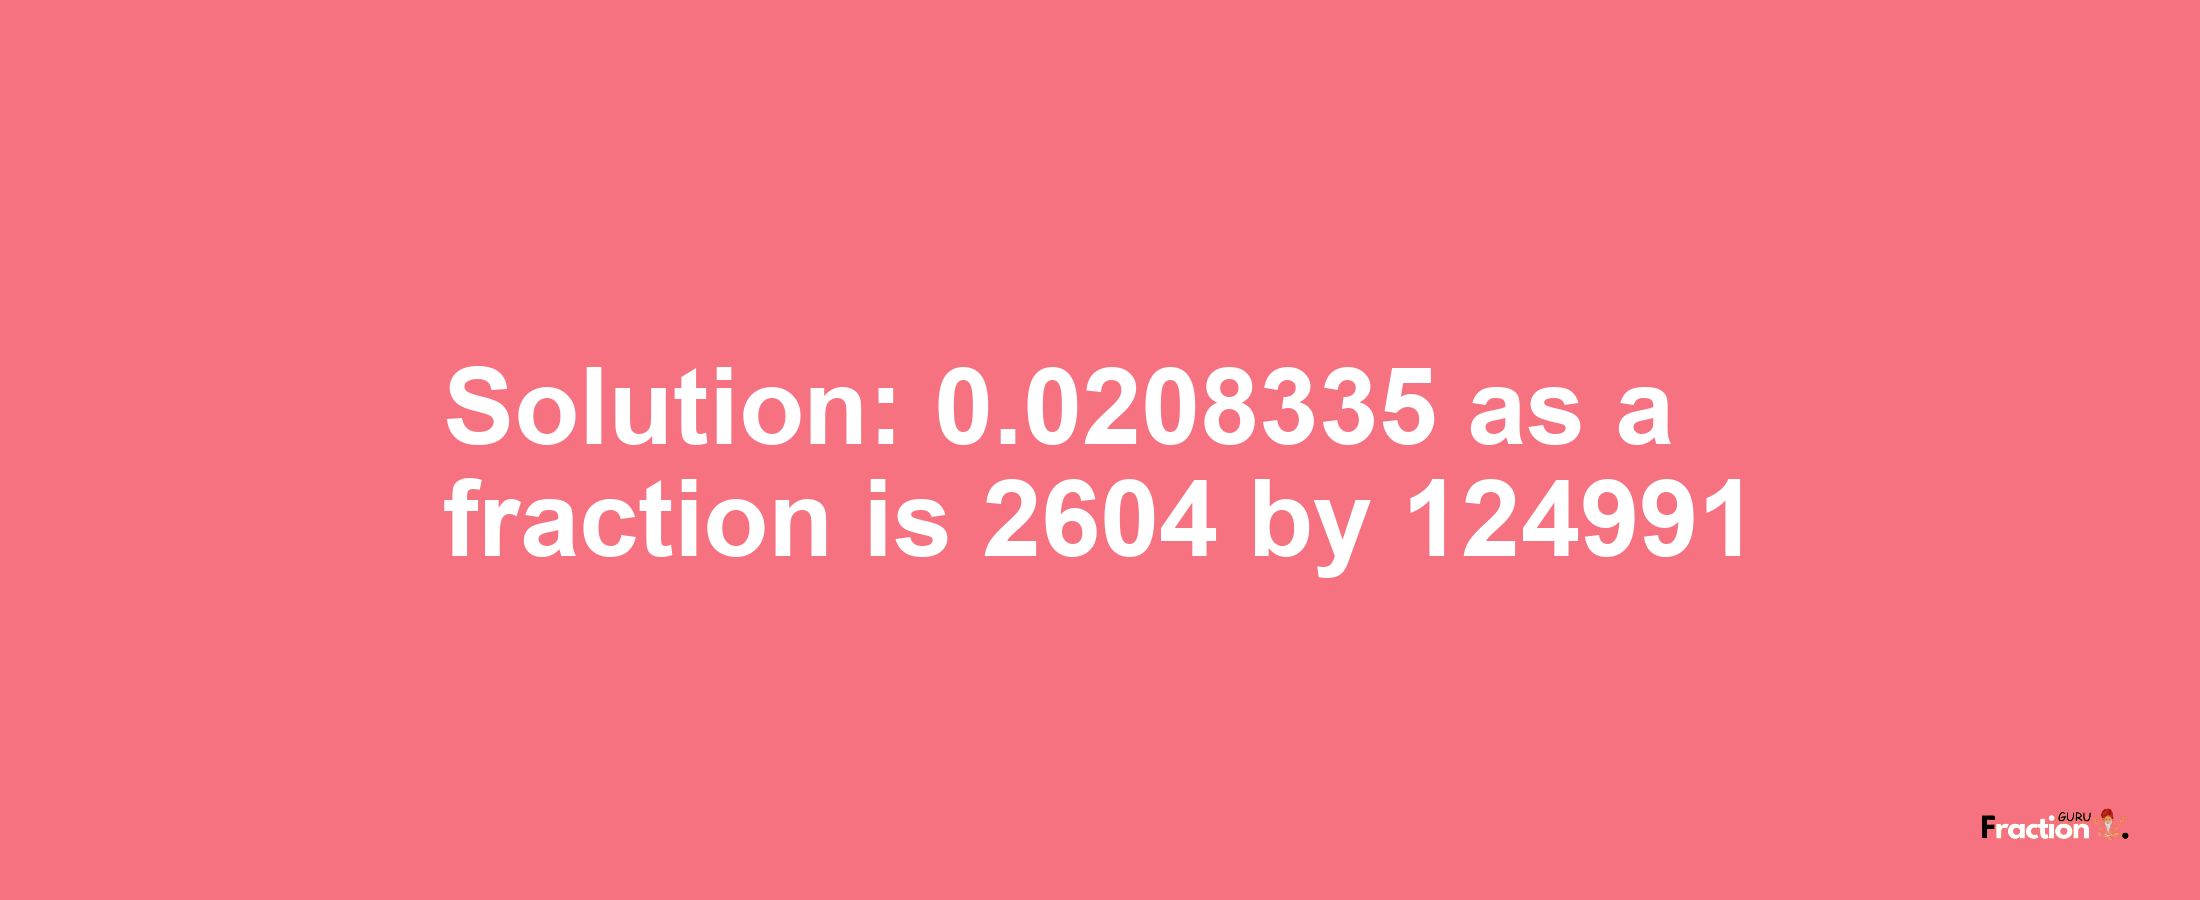 Solution:0.0208335 as a fraction is 2604/124991